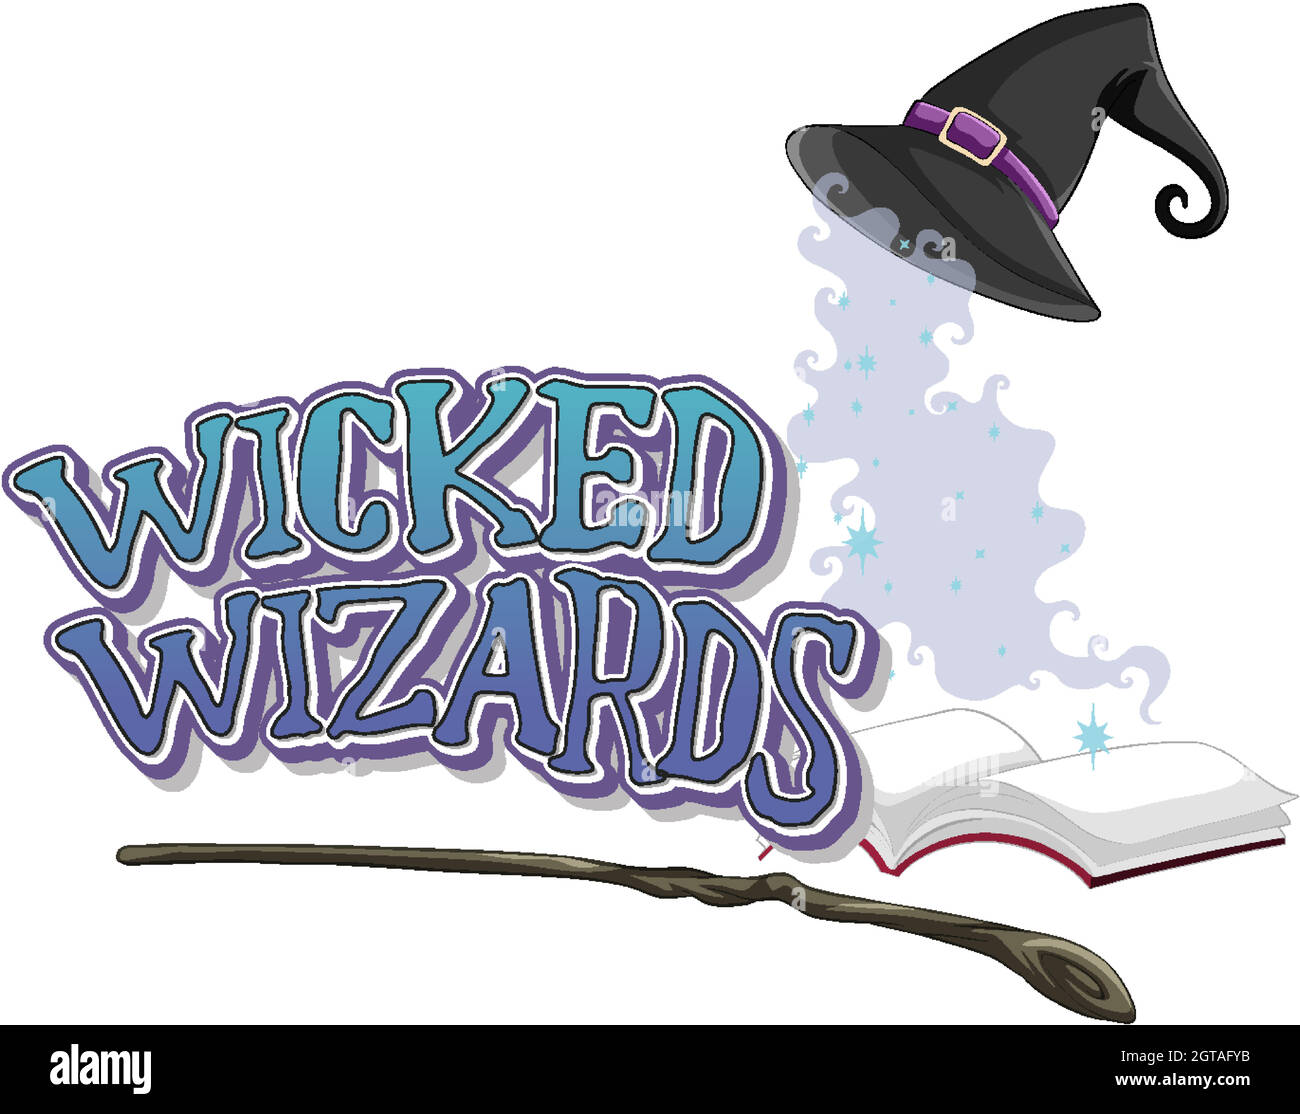 Wicked wizards logo on white background Stock Vector